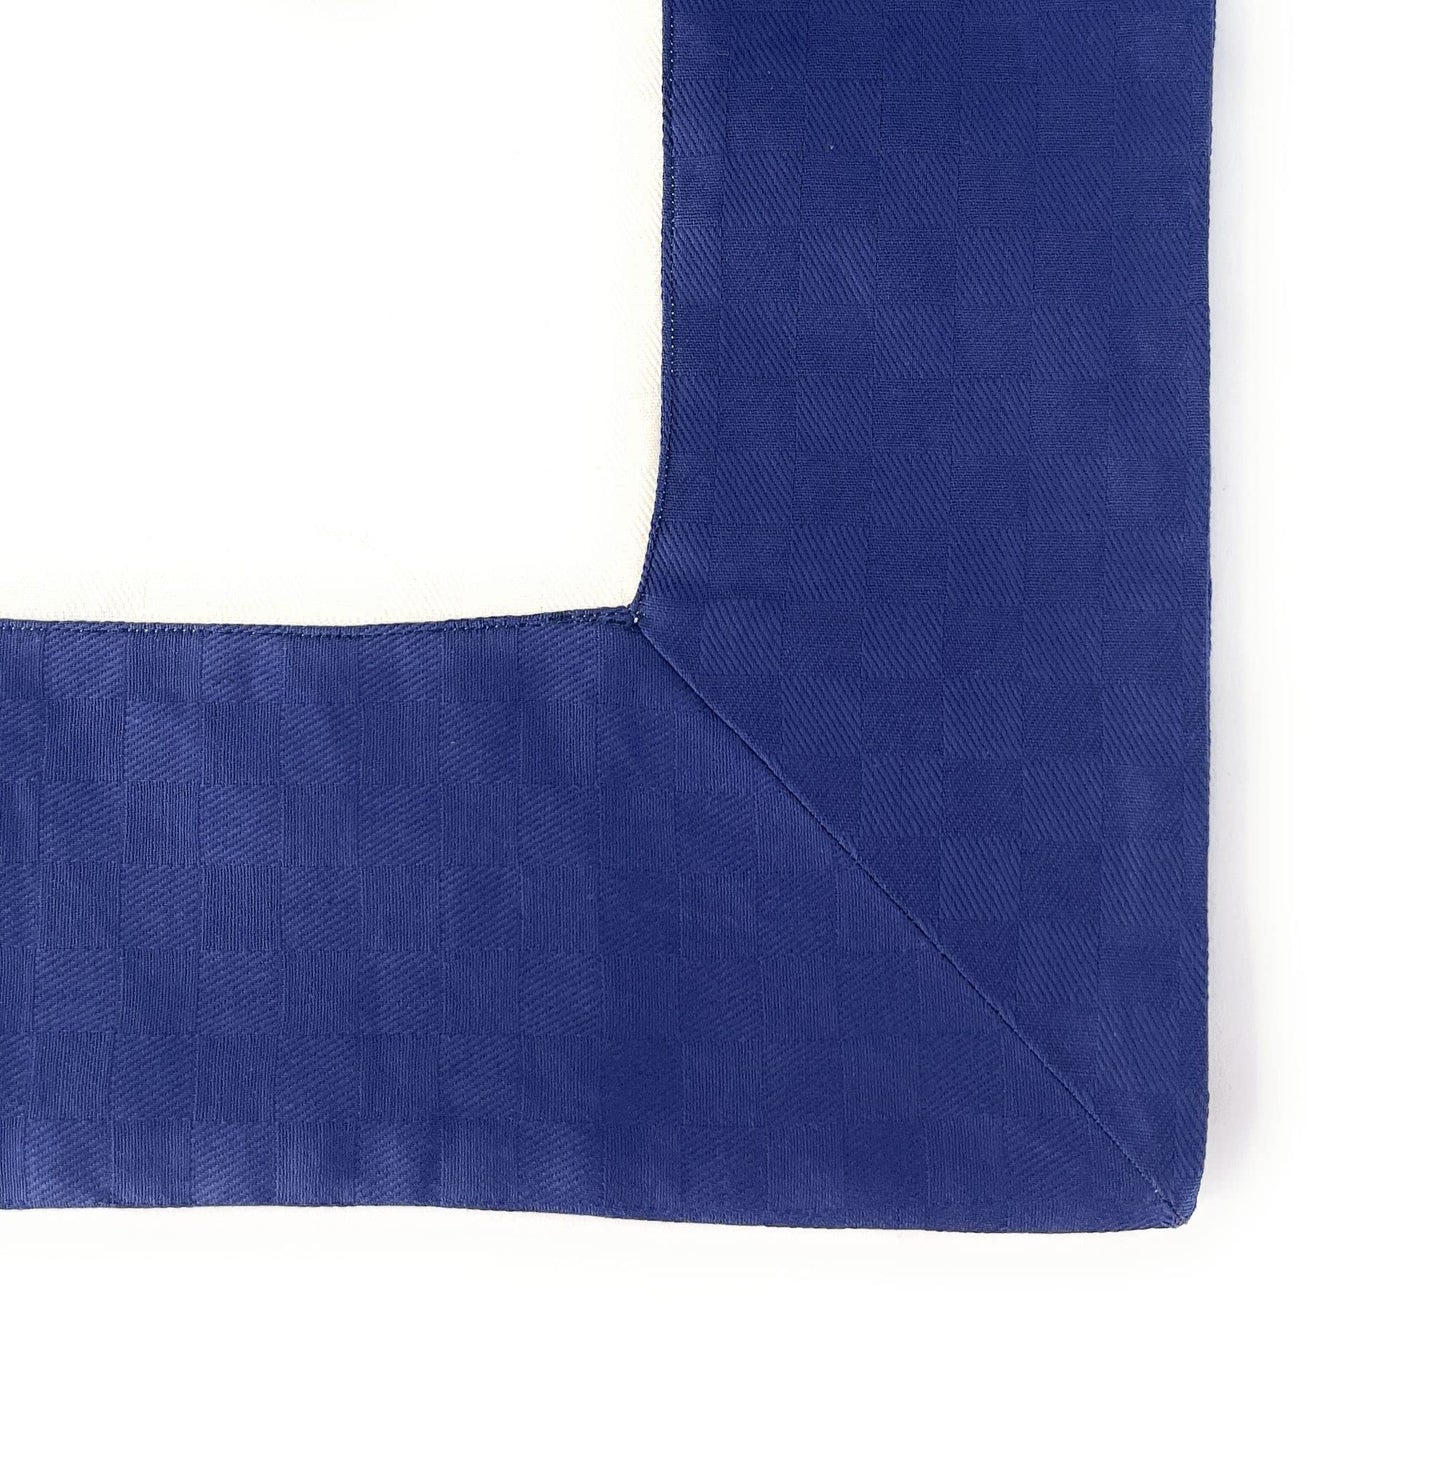 Rectangular tablecloth with 6 napkins, pure cotton, handmade product made in Italy (Mare, Ancore Blu)